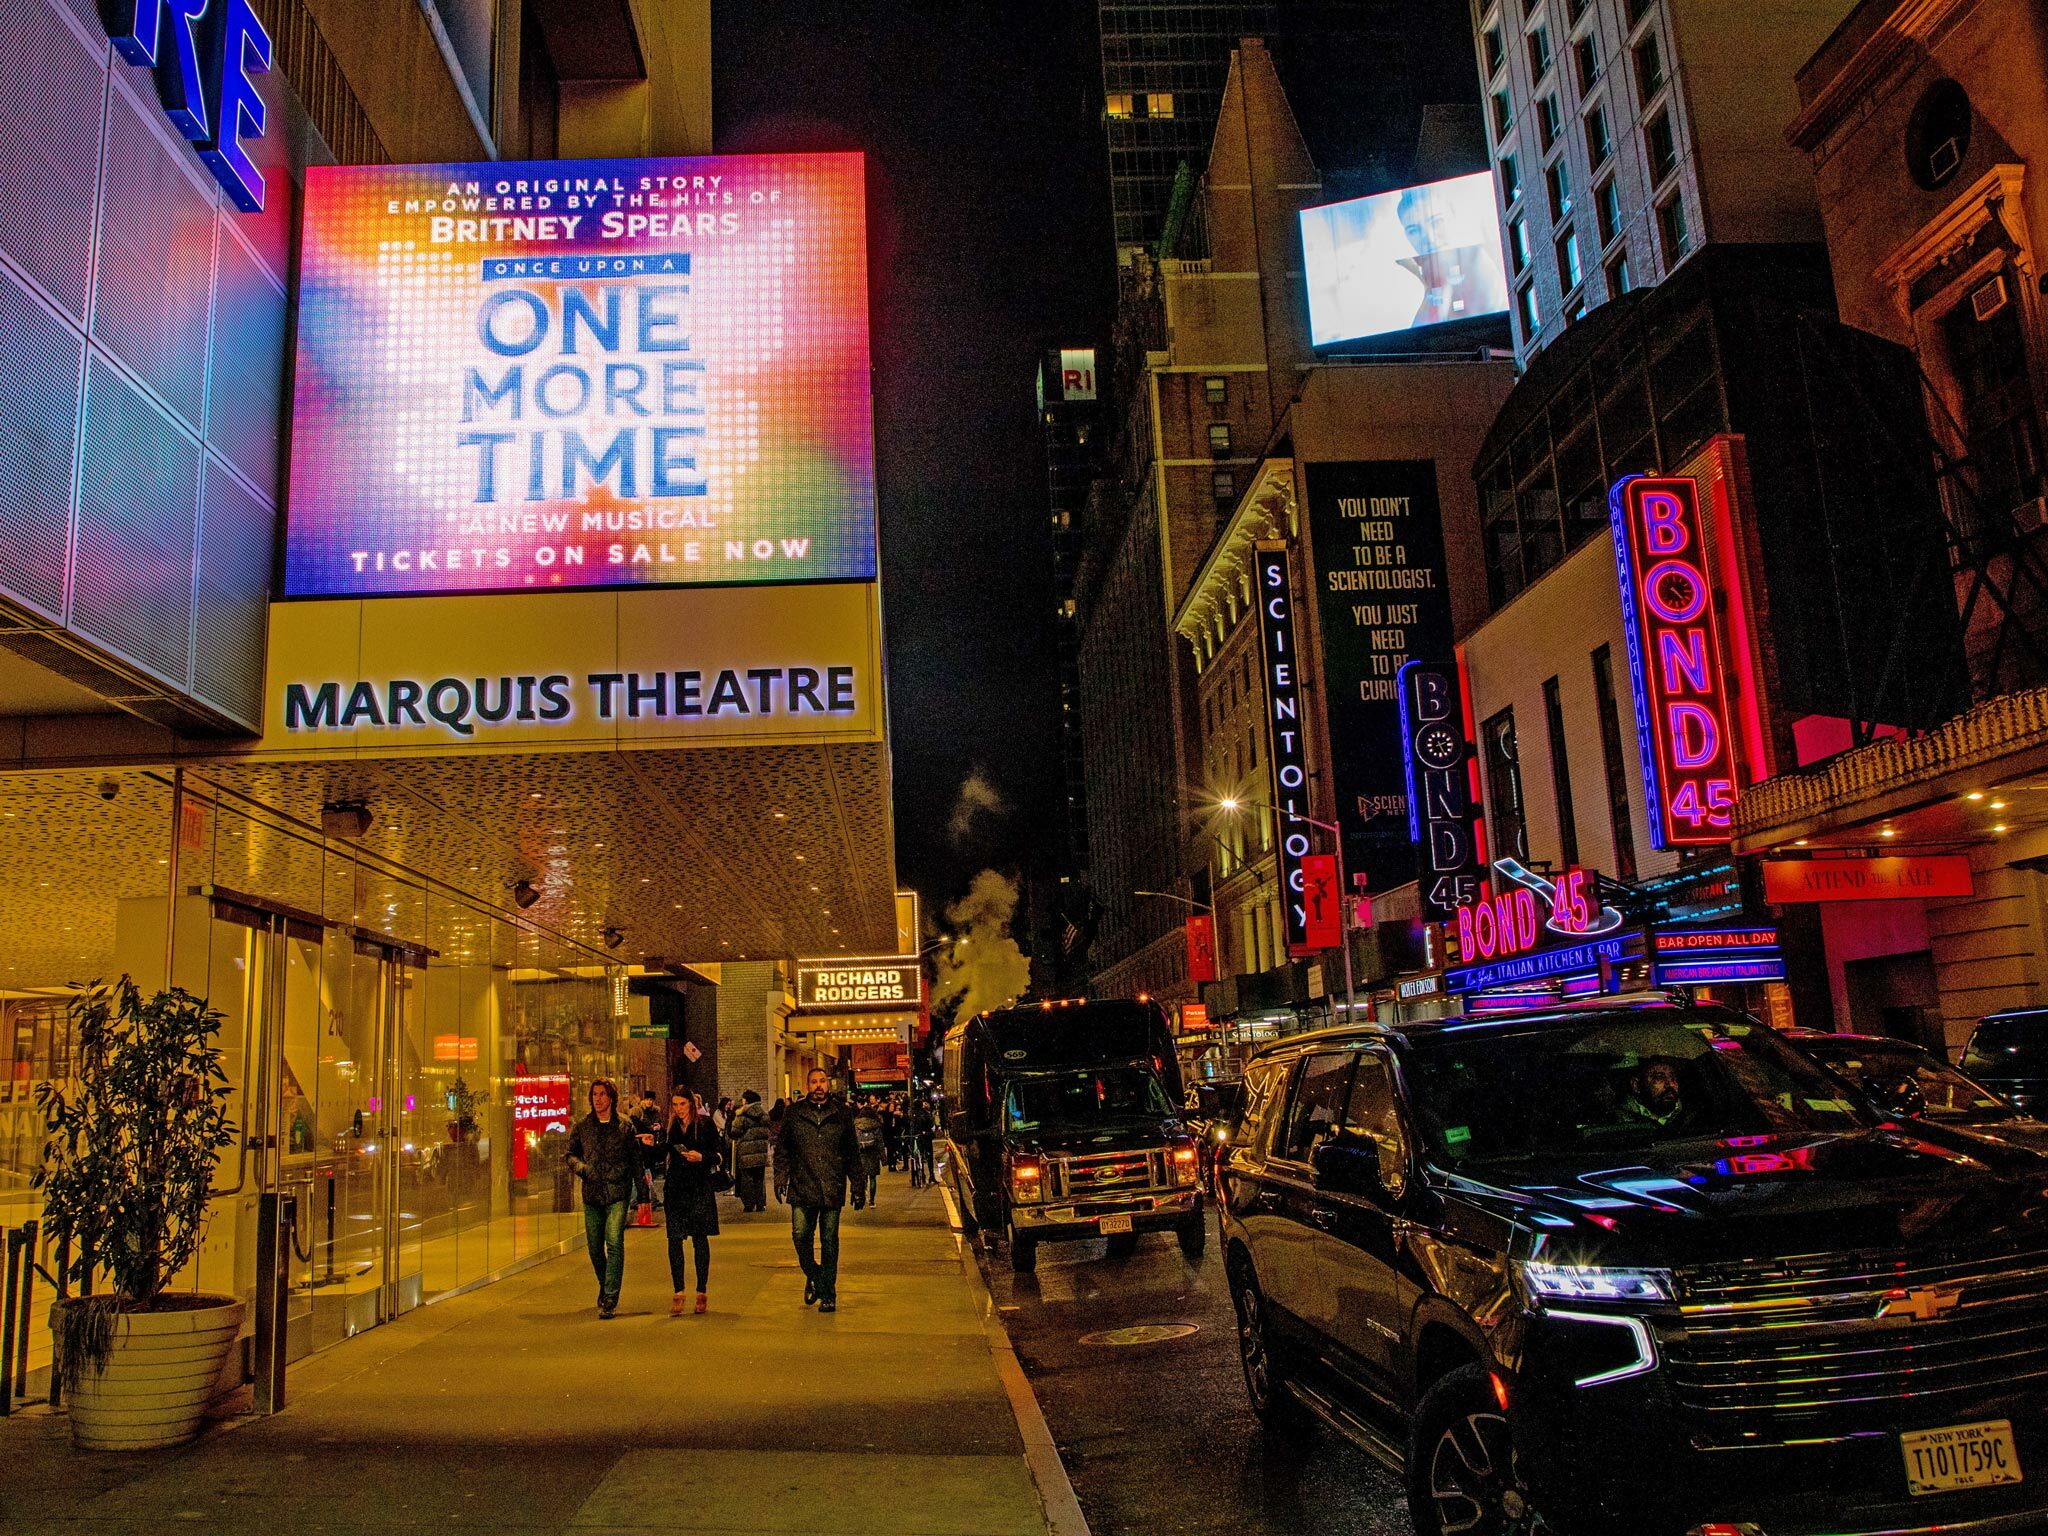 Once Upon a Time One More Time Theatre Marquee at the Marquis Theatre on Broadway